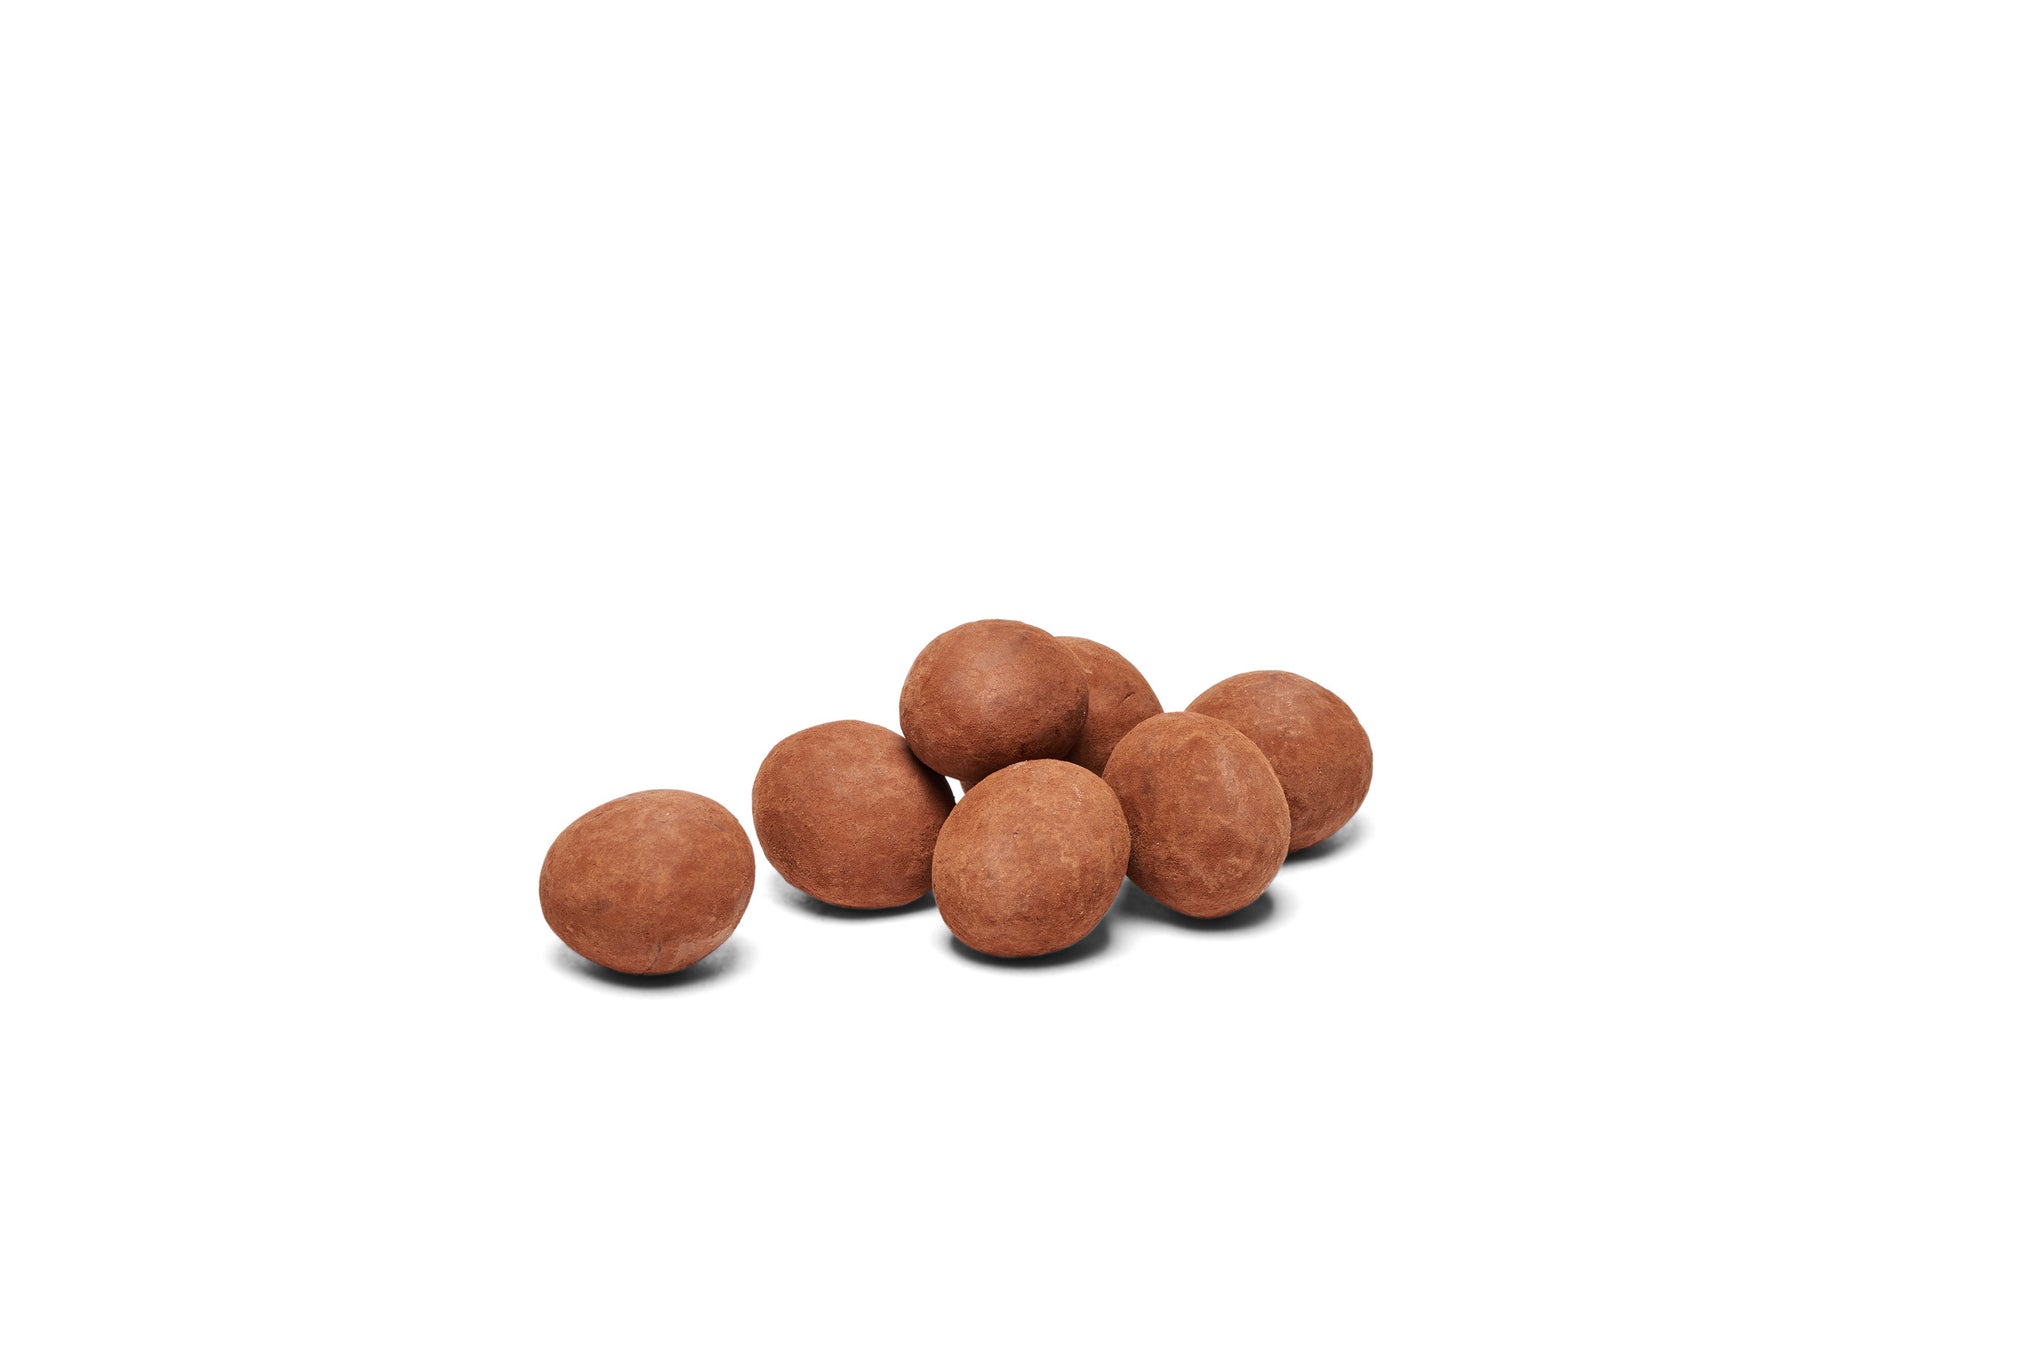 Chocolate dusted hazelnuts placed together